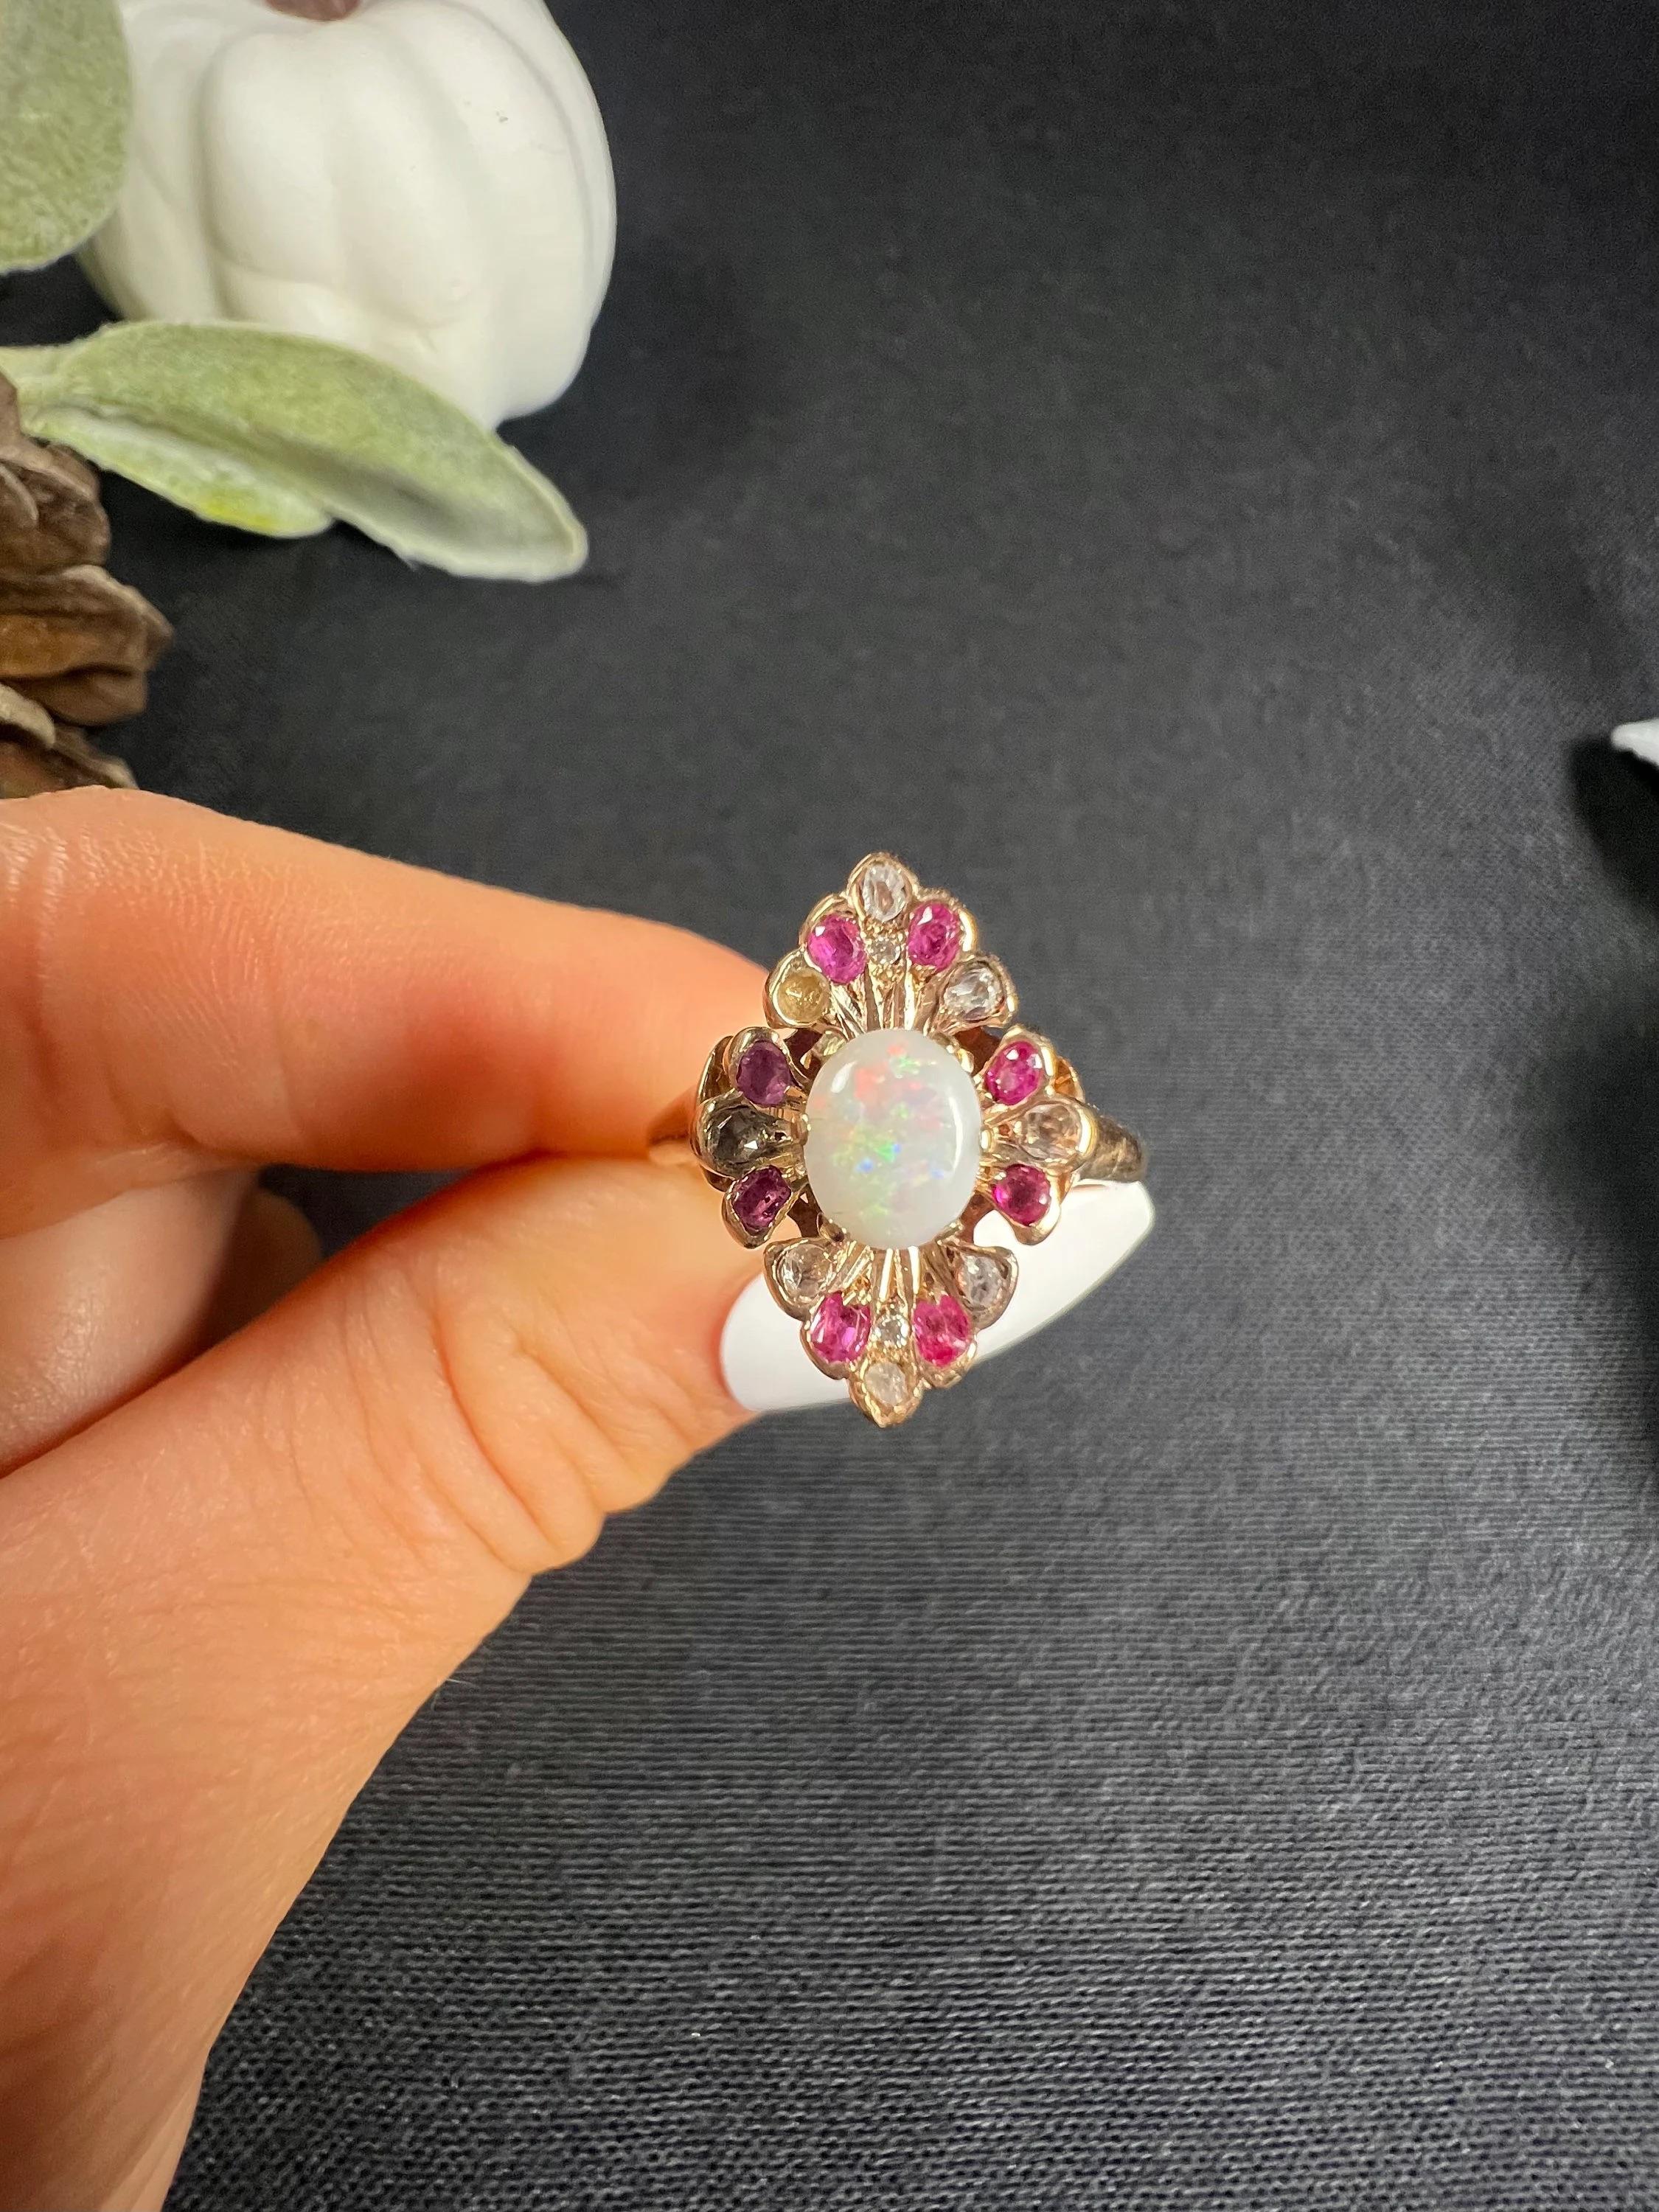 Antique Opal Marquise Ring

18ct Rose Gold Tested

Circa 1880s

This Victorian ring, made of 18ct rose gold, is a true work of art. The stunning oval opal centre stone is framed perfectly by four beautiful fans, each set with old-cut diamonds and